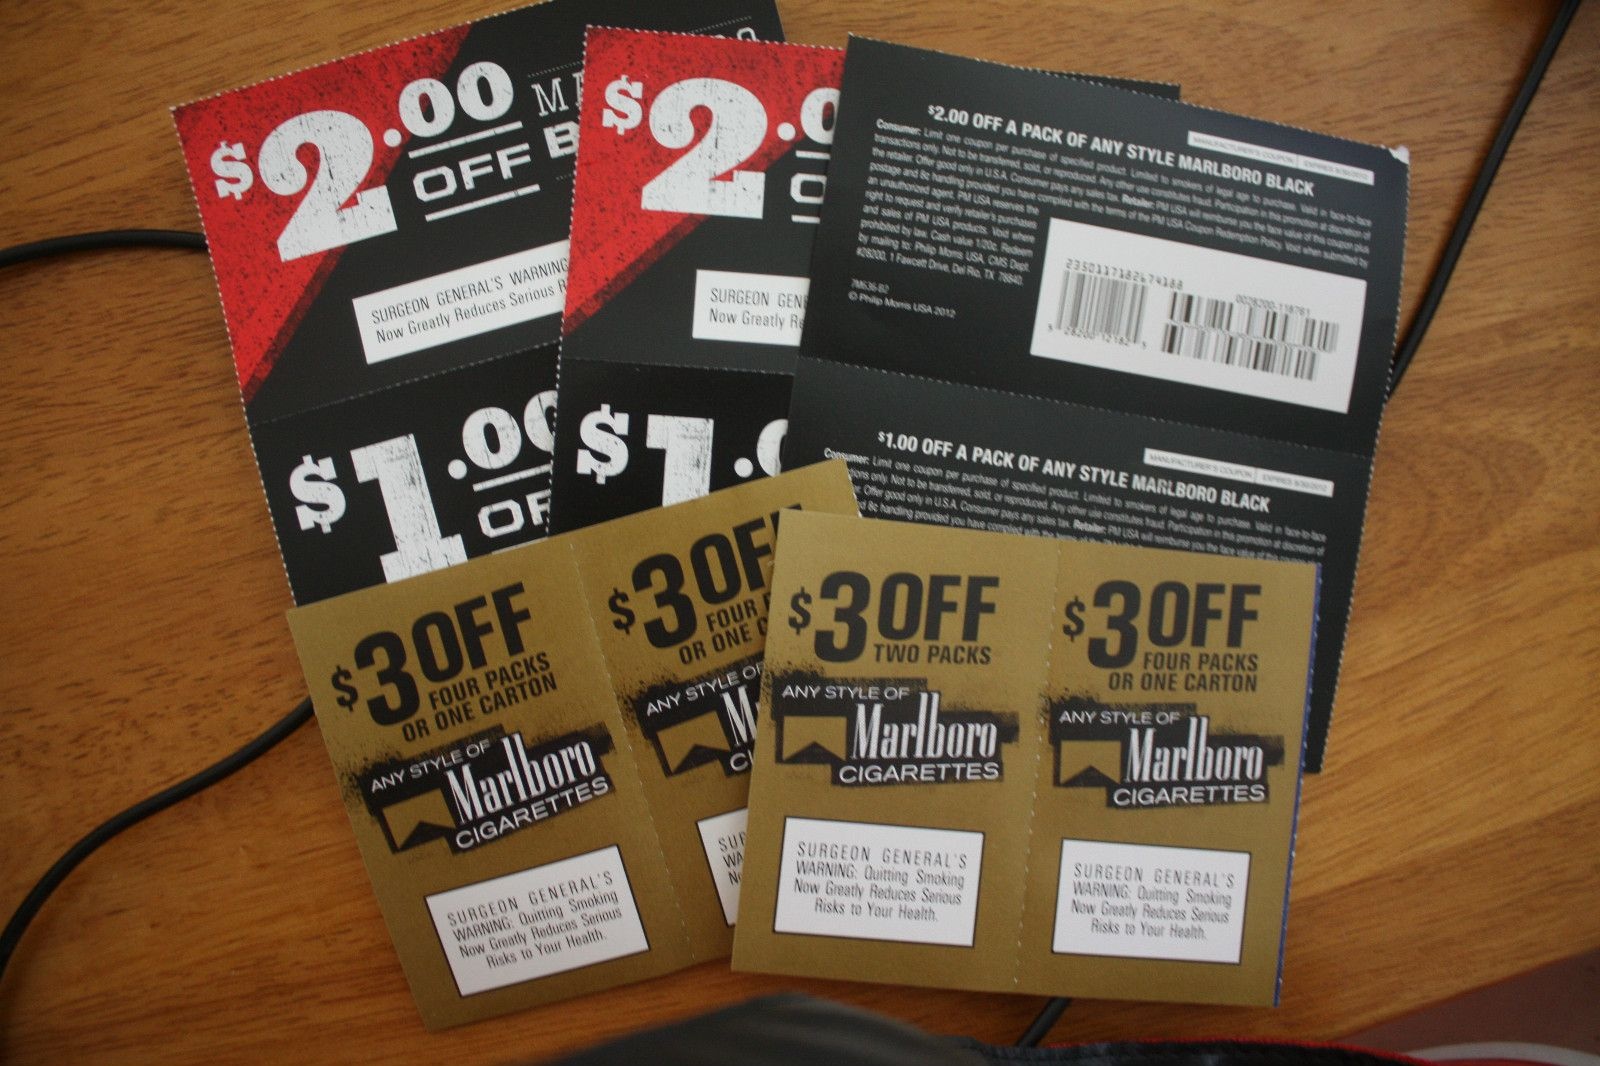 Pindraven Lee On Cigarette Coupons In 2019 | Cigarette Coupons - Free Printable Cigarette Coupons